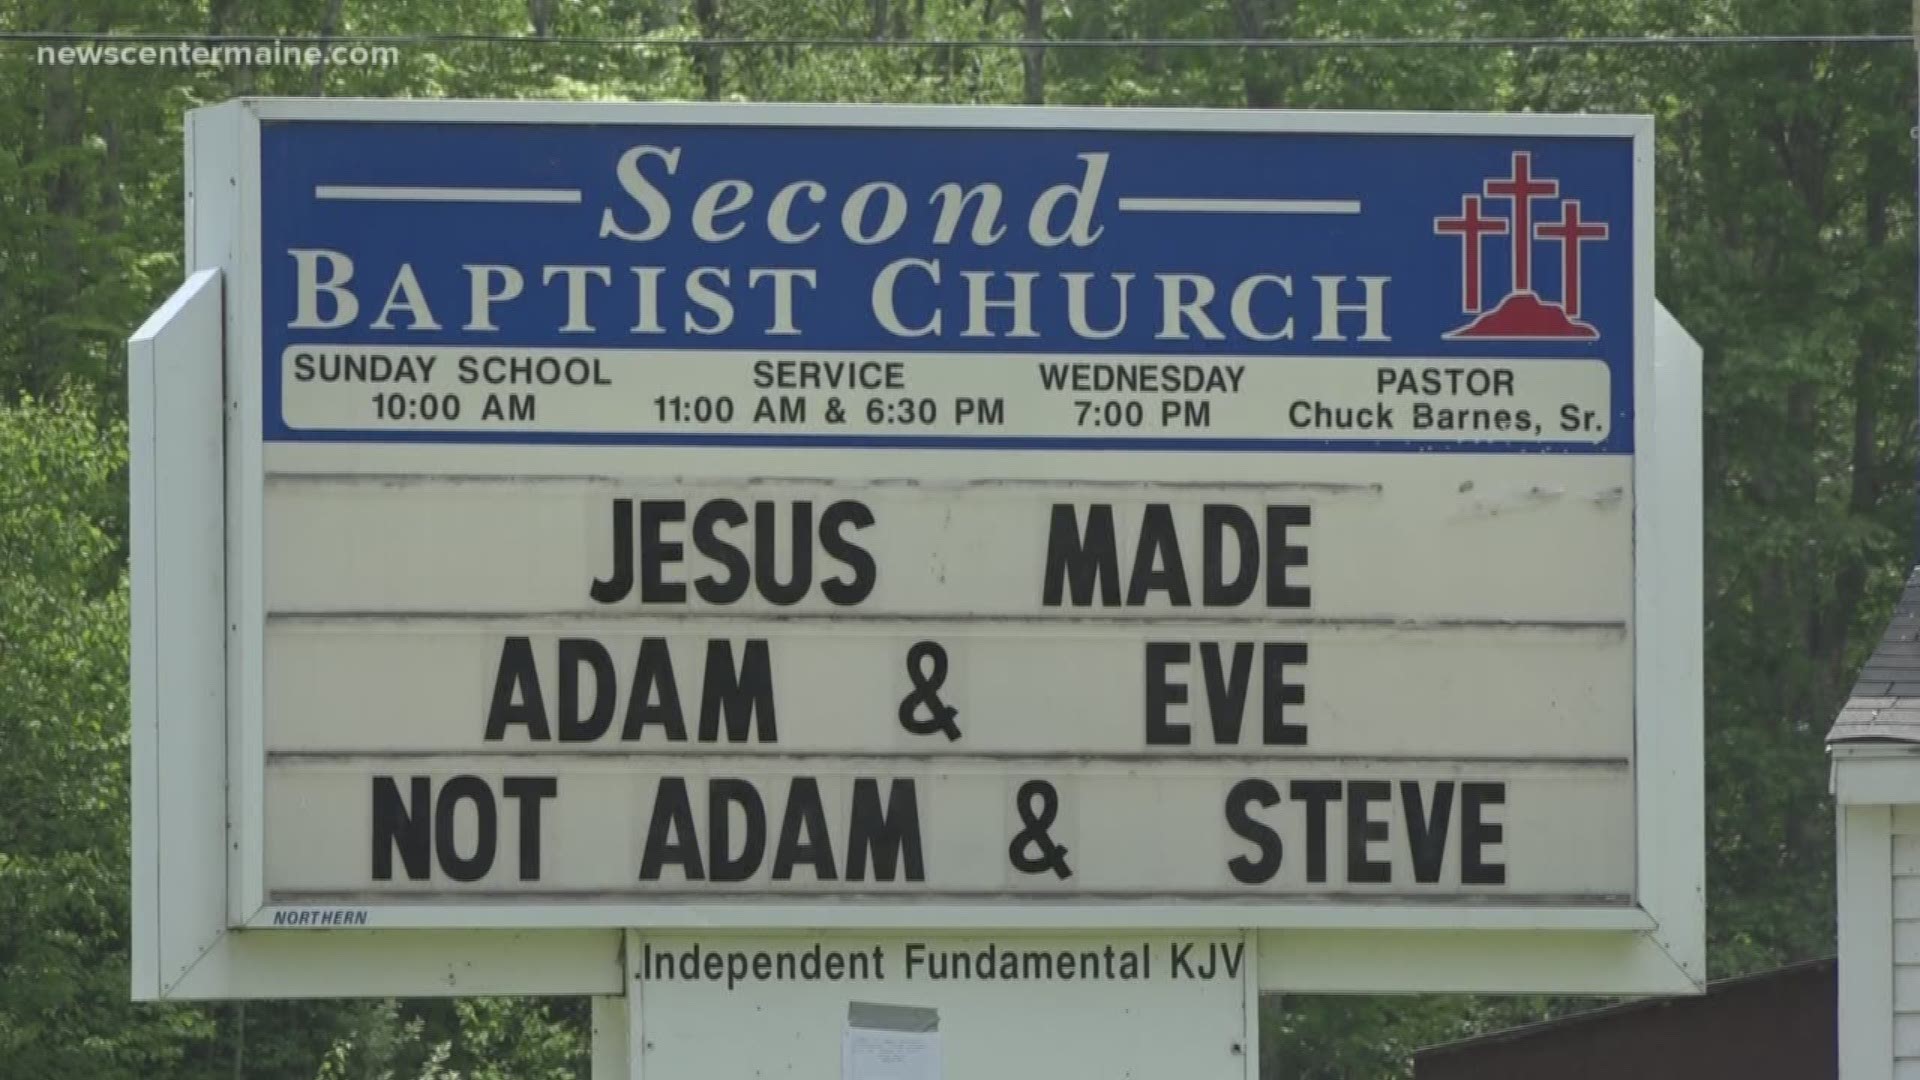 The sign at Second Baptist Church in Palermo reads 'Jesus made Adam & Eve, not Adam & Steve'.